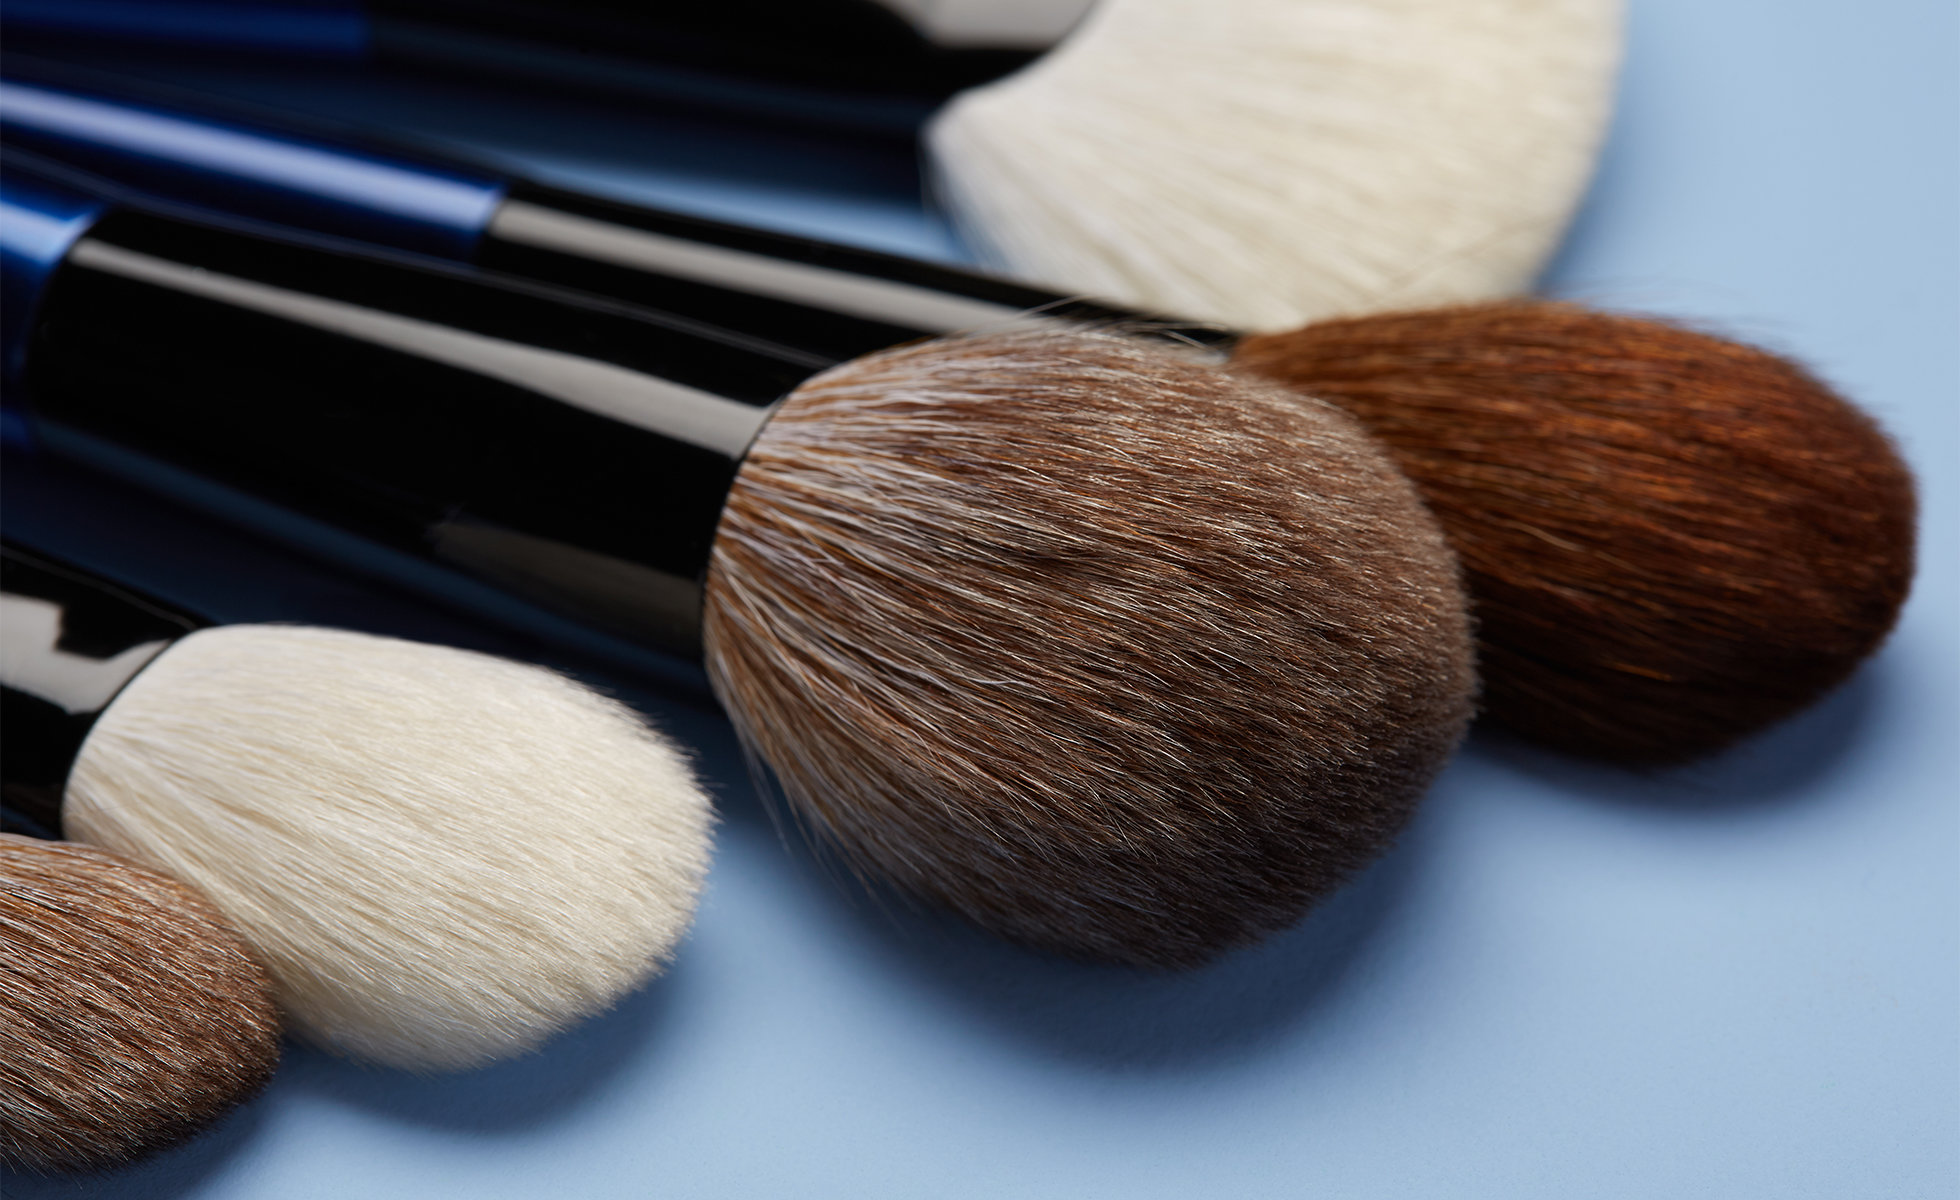 Can you use Cream and Liquid Makeup products with Natural Hair Brushes?